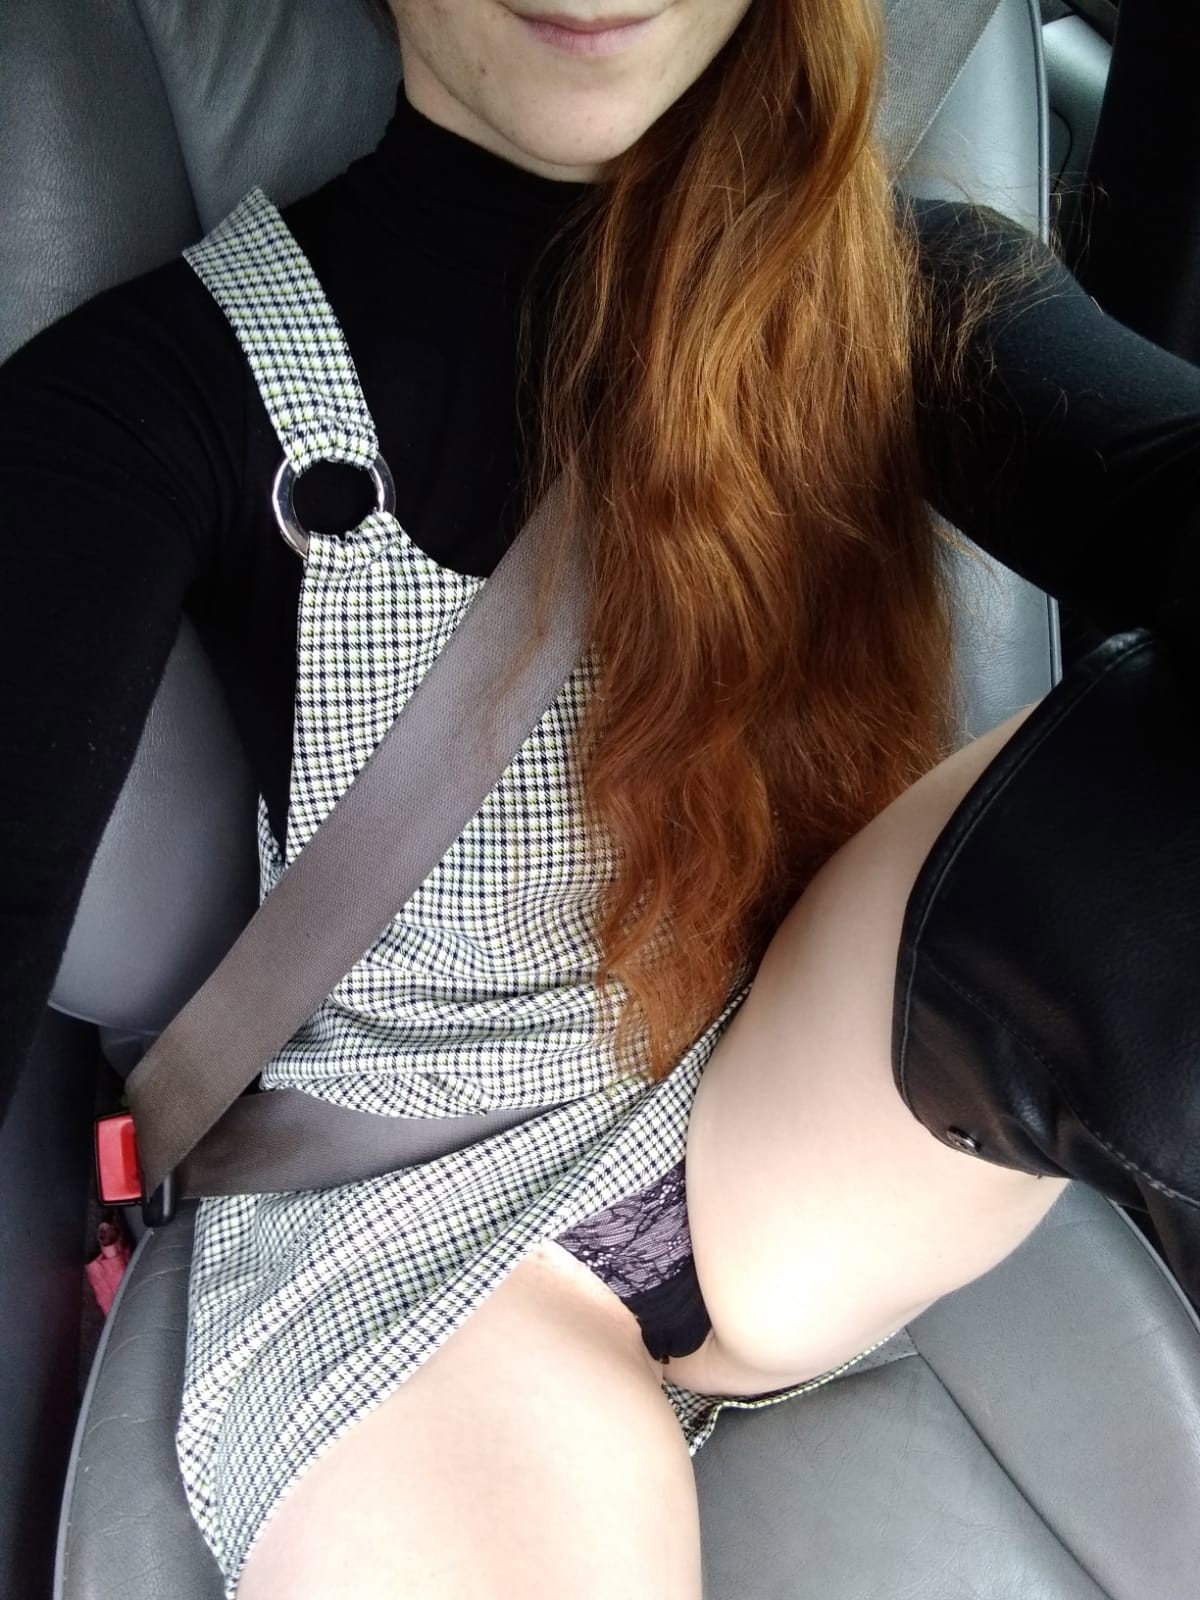 Photo by RedHeadedBi with the username @RedHeadedBi, who is a star user,  November 3, 2020 at 2:29 PM and the text says 'Feeling sexy in yesterday's outfit! Had to share this photo with yous 😇😈💦 

Loving the socks and boots look, what do yous think?'